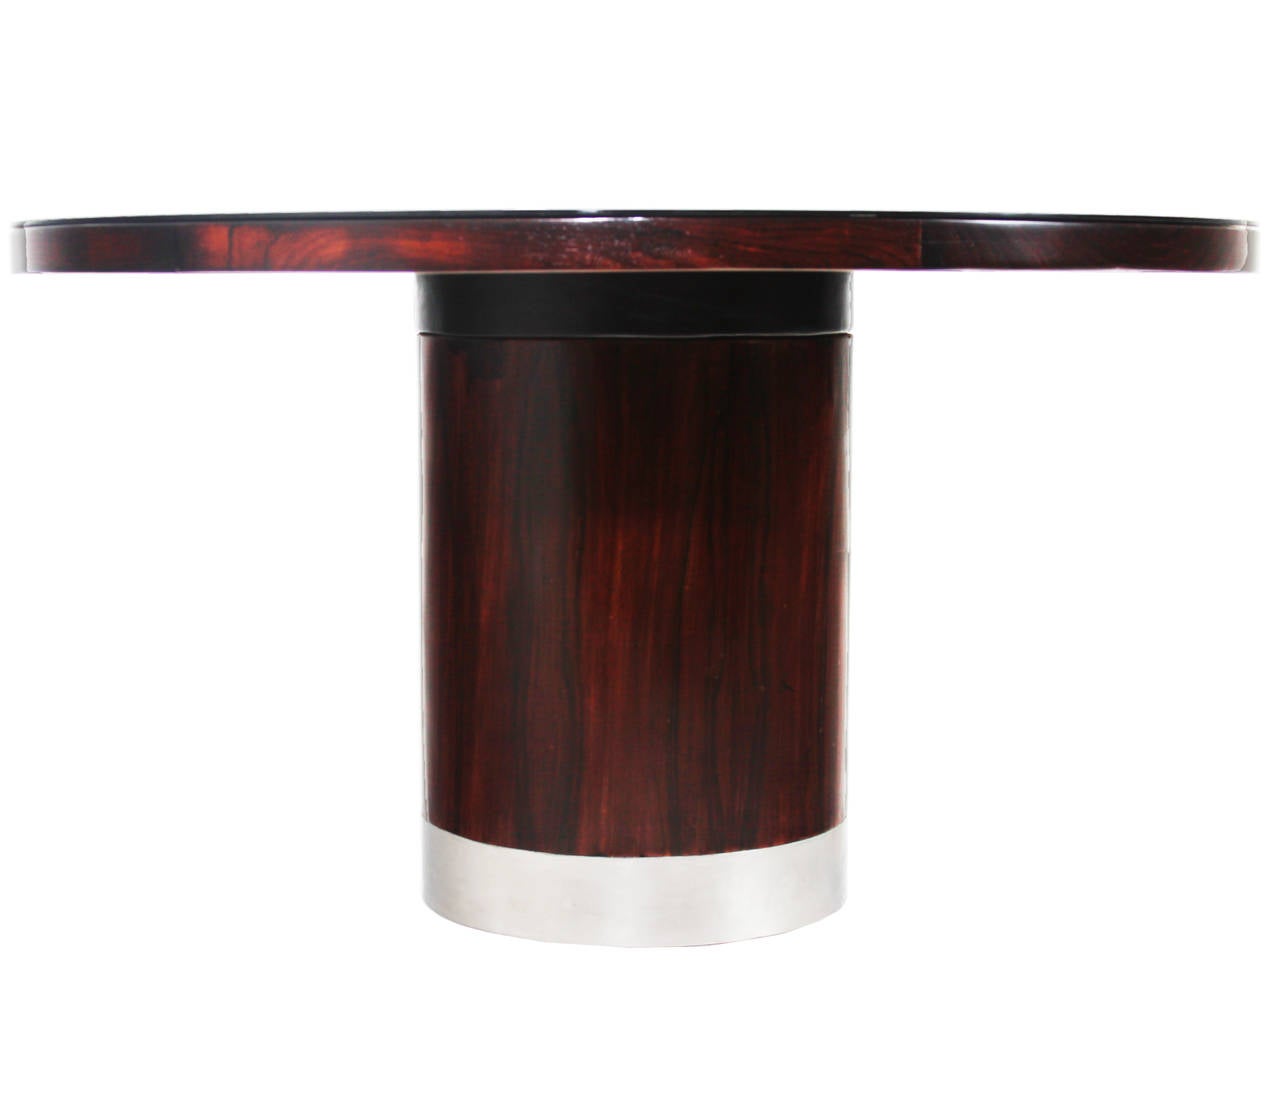 A beautiful rosewood dining table by Brazilian designer Sergio Rodrigues with black glass top. The base has a 4